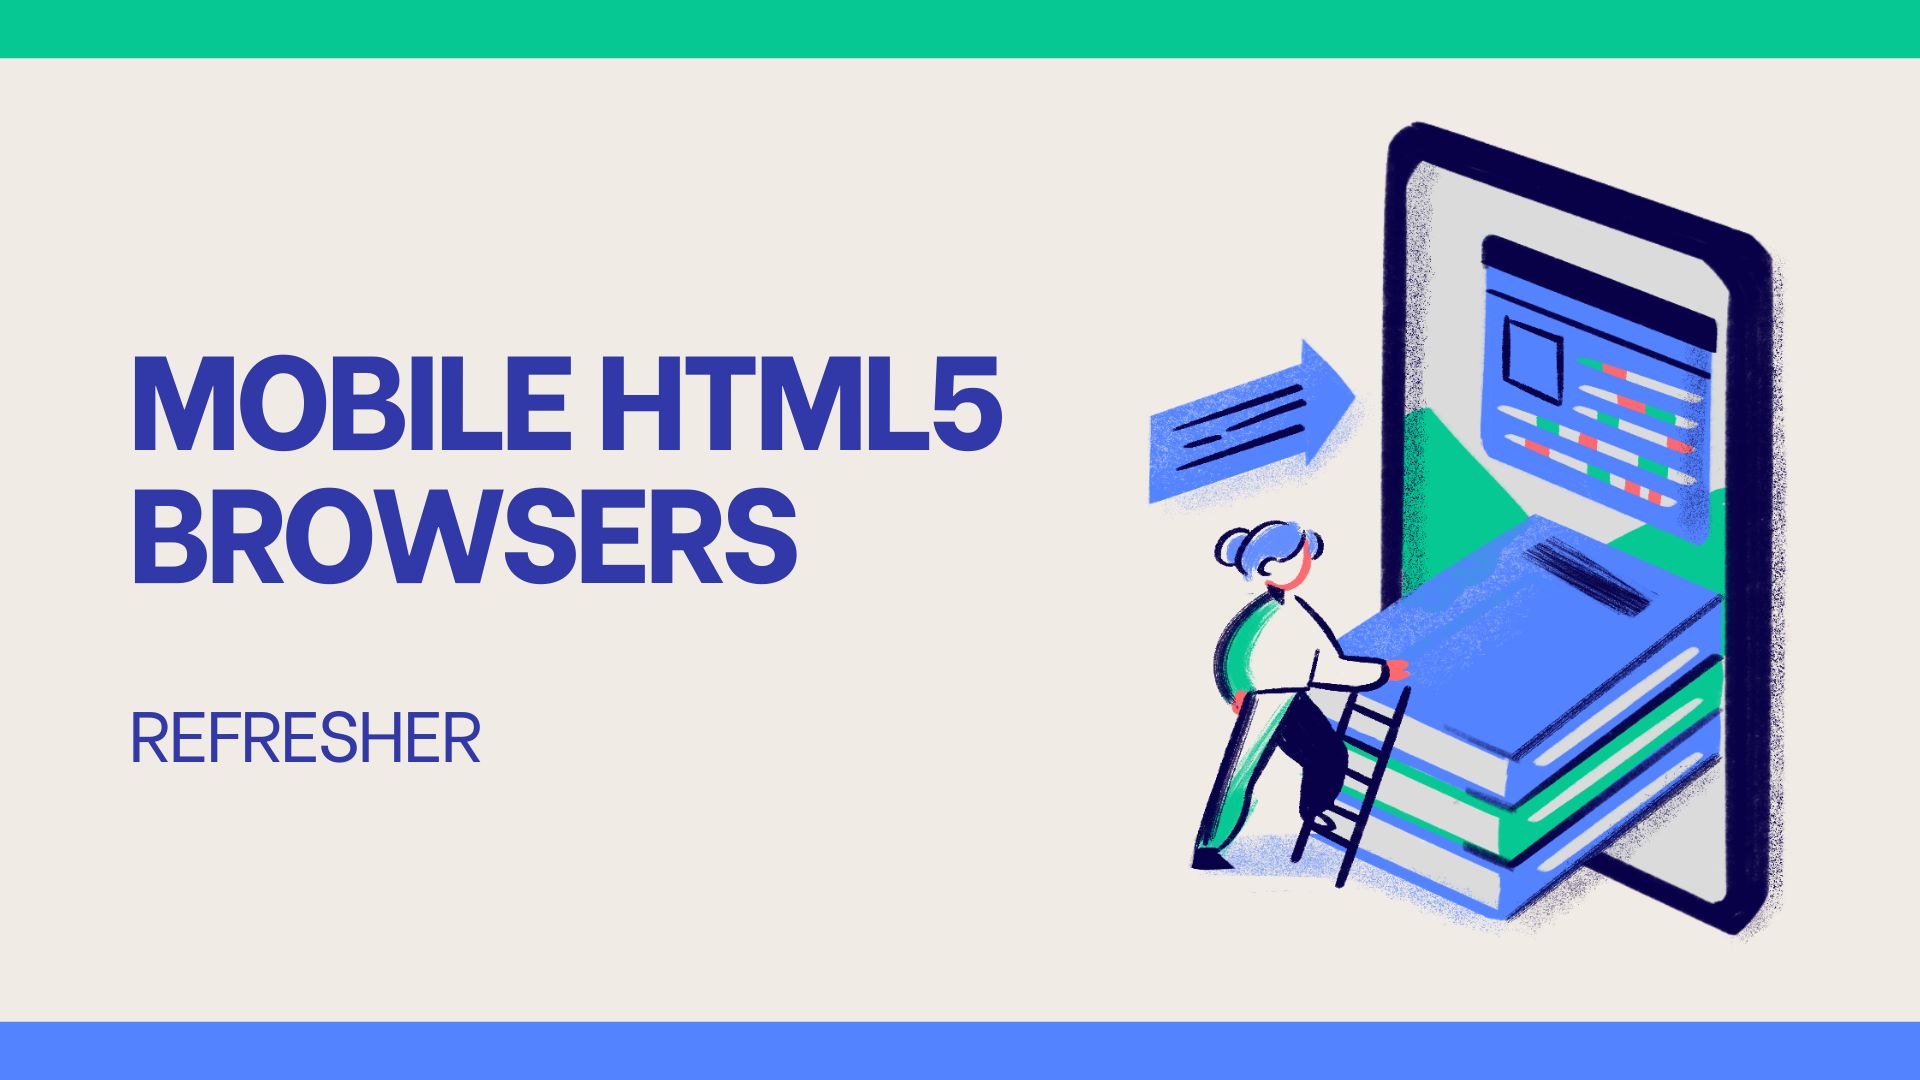 Refresher - Mobile HTML5 browsers